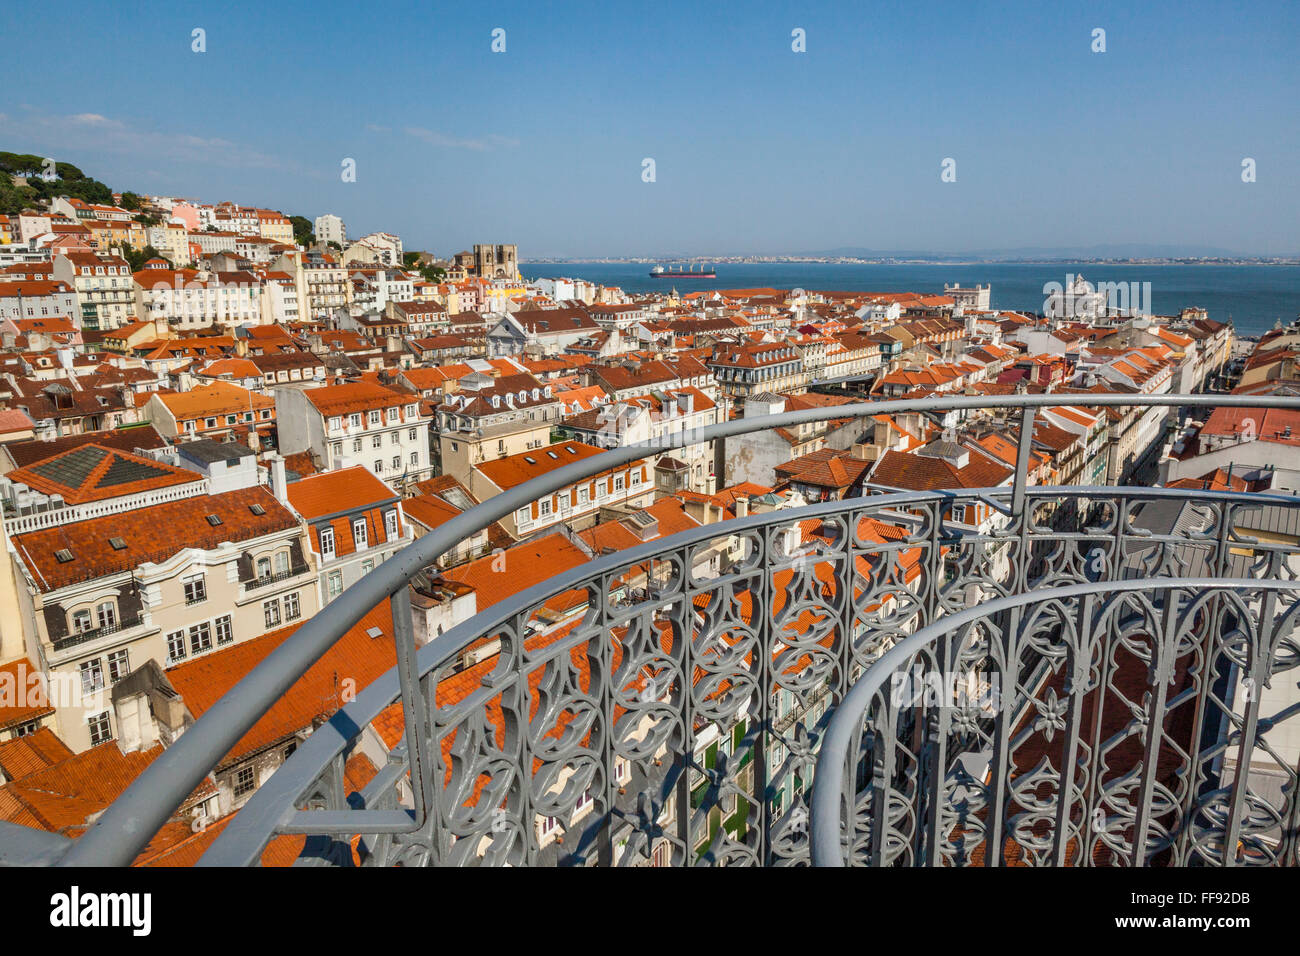 cast iron railing of the upper level terrace of Santa Justa Lift overlooking the Pombaline Downtown of Lisbon, Portugal Stock Photo